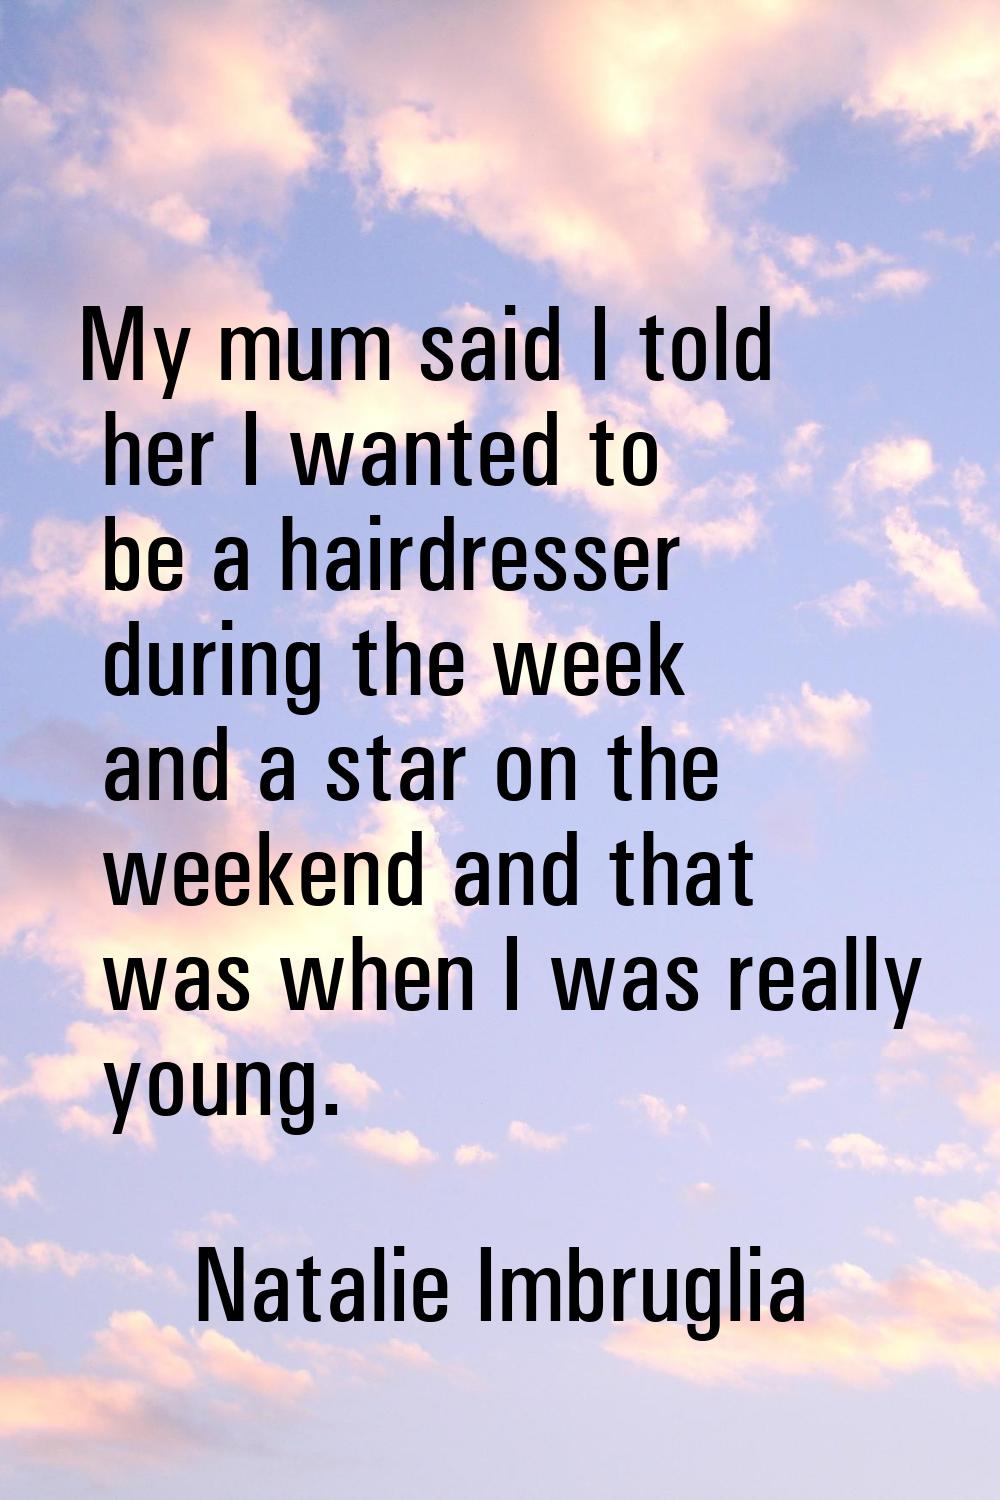 My mum said I told her I wanted to be a hairdresser during the week and a star on the weekend and t